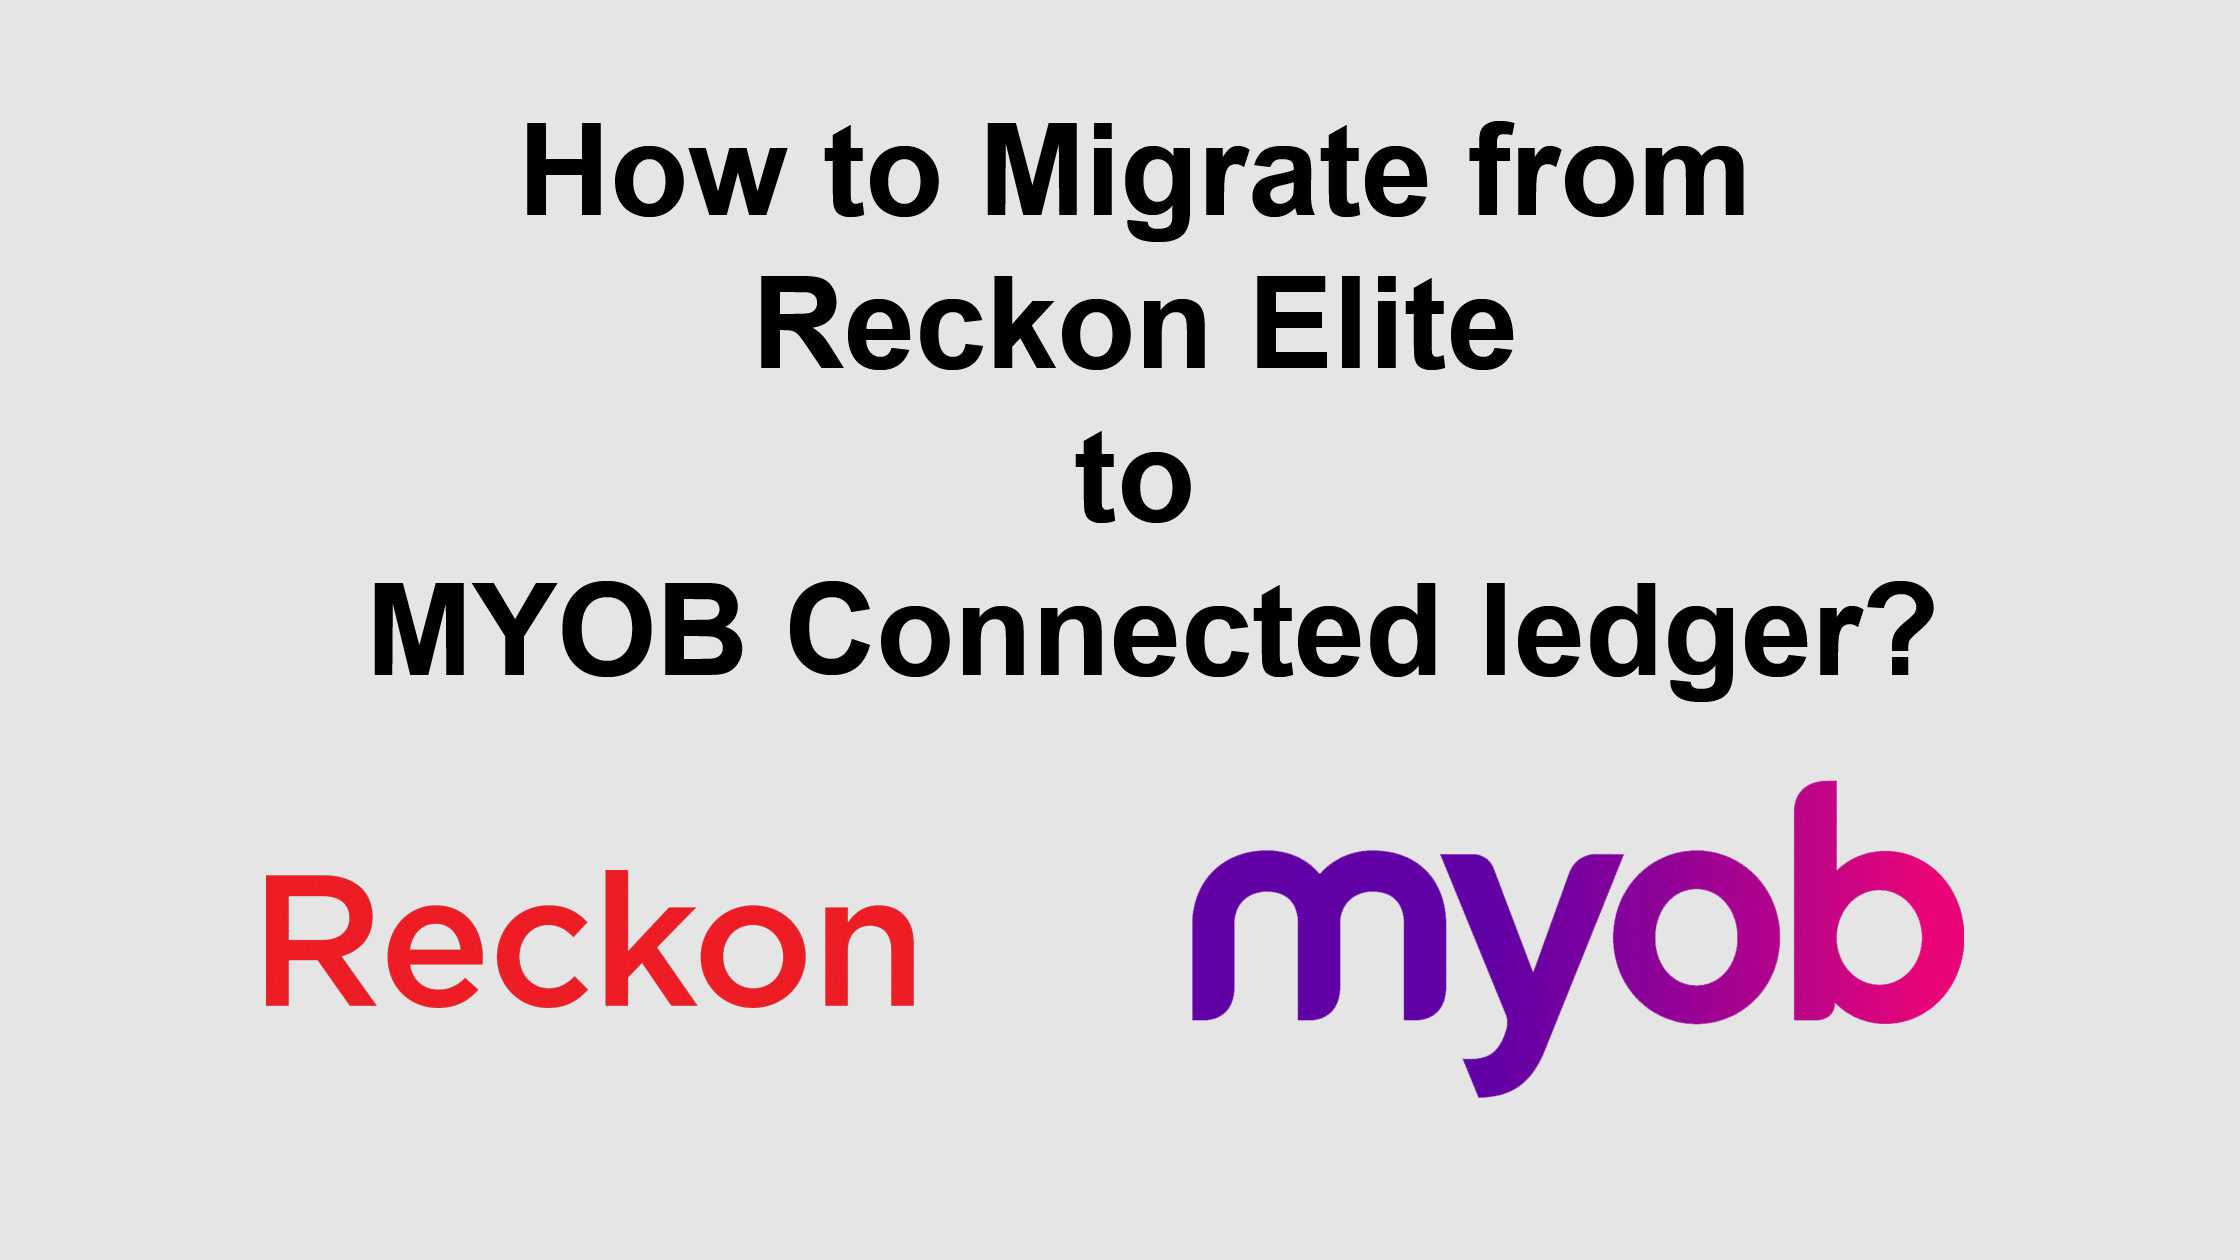 How to Migrate from Reckon Elite to MYOB Connected ledger?